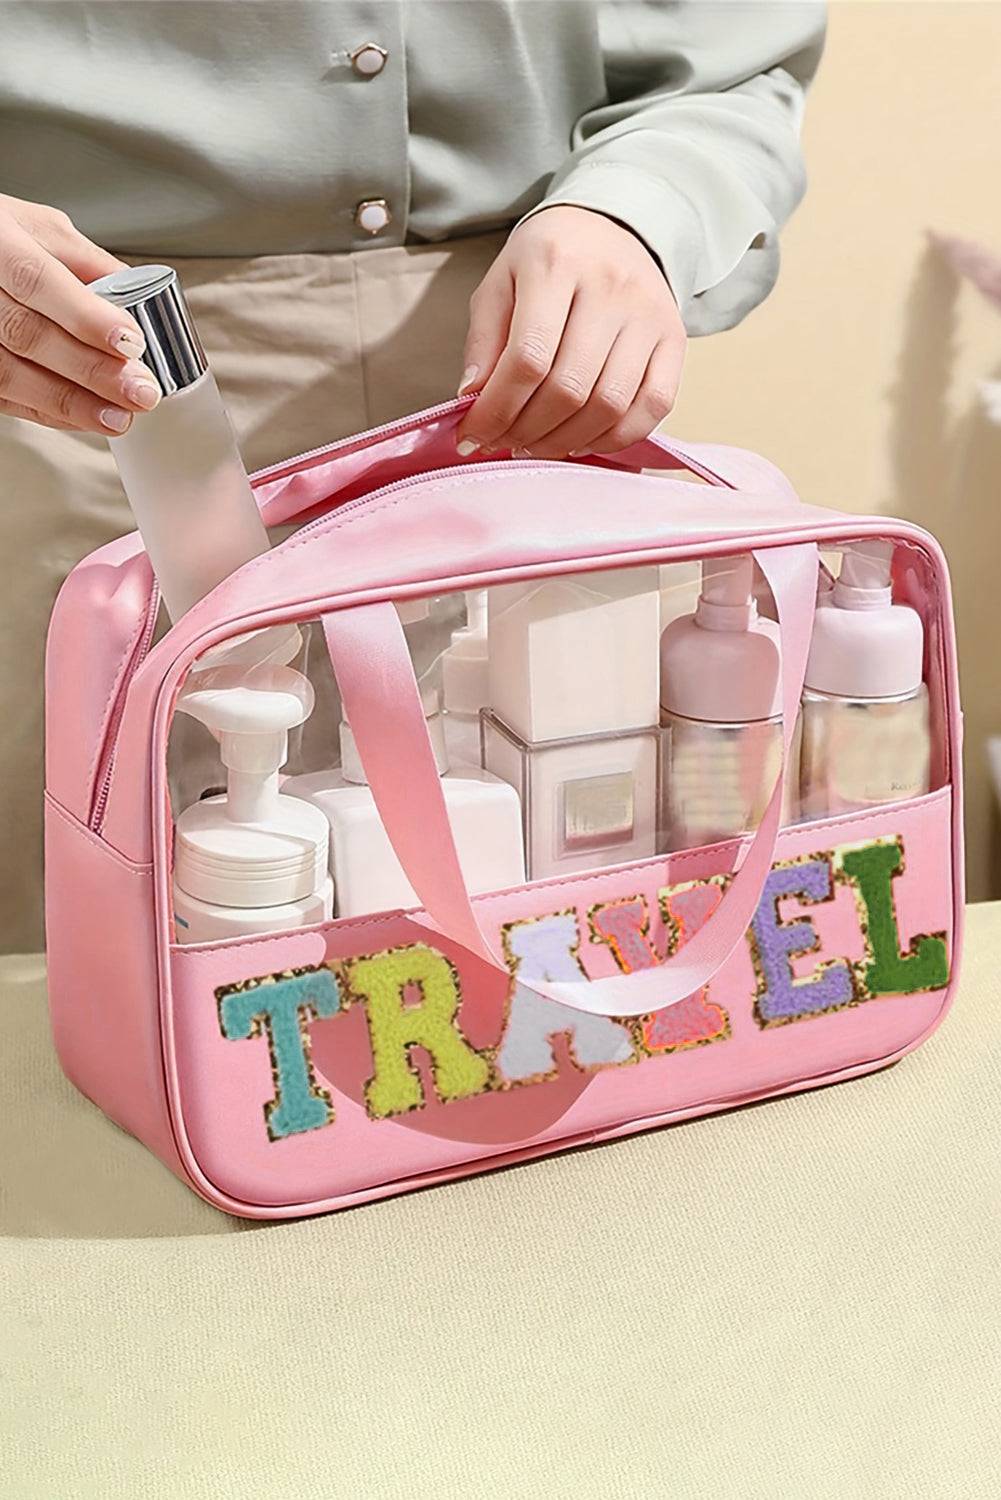 a person holding a pink travel bag filled with personal care items